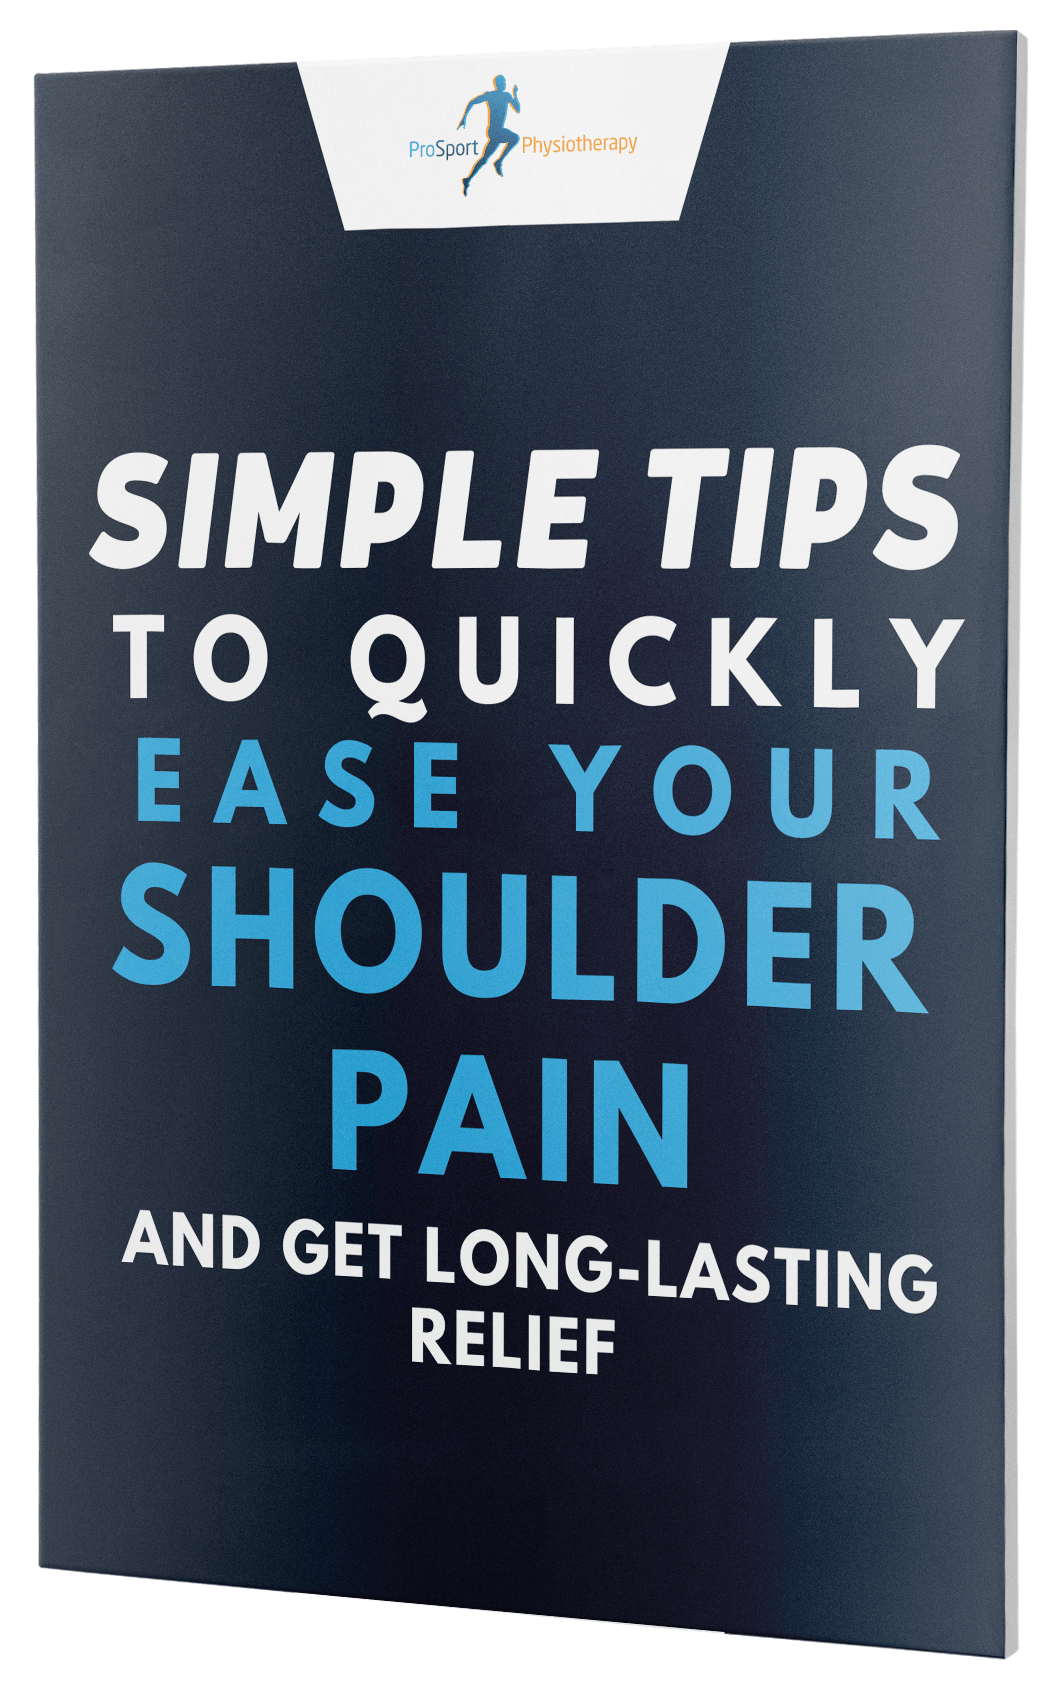 Shoulder Pain Relief Tips PDF Guide - Pro Sport Physiotherapy Huddersfield Clinic